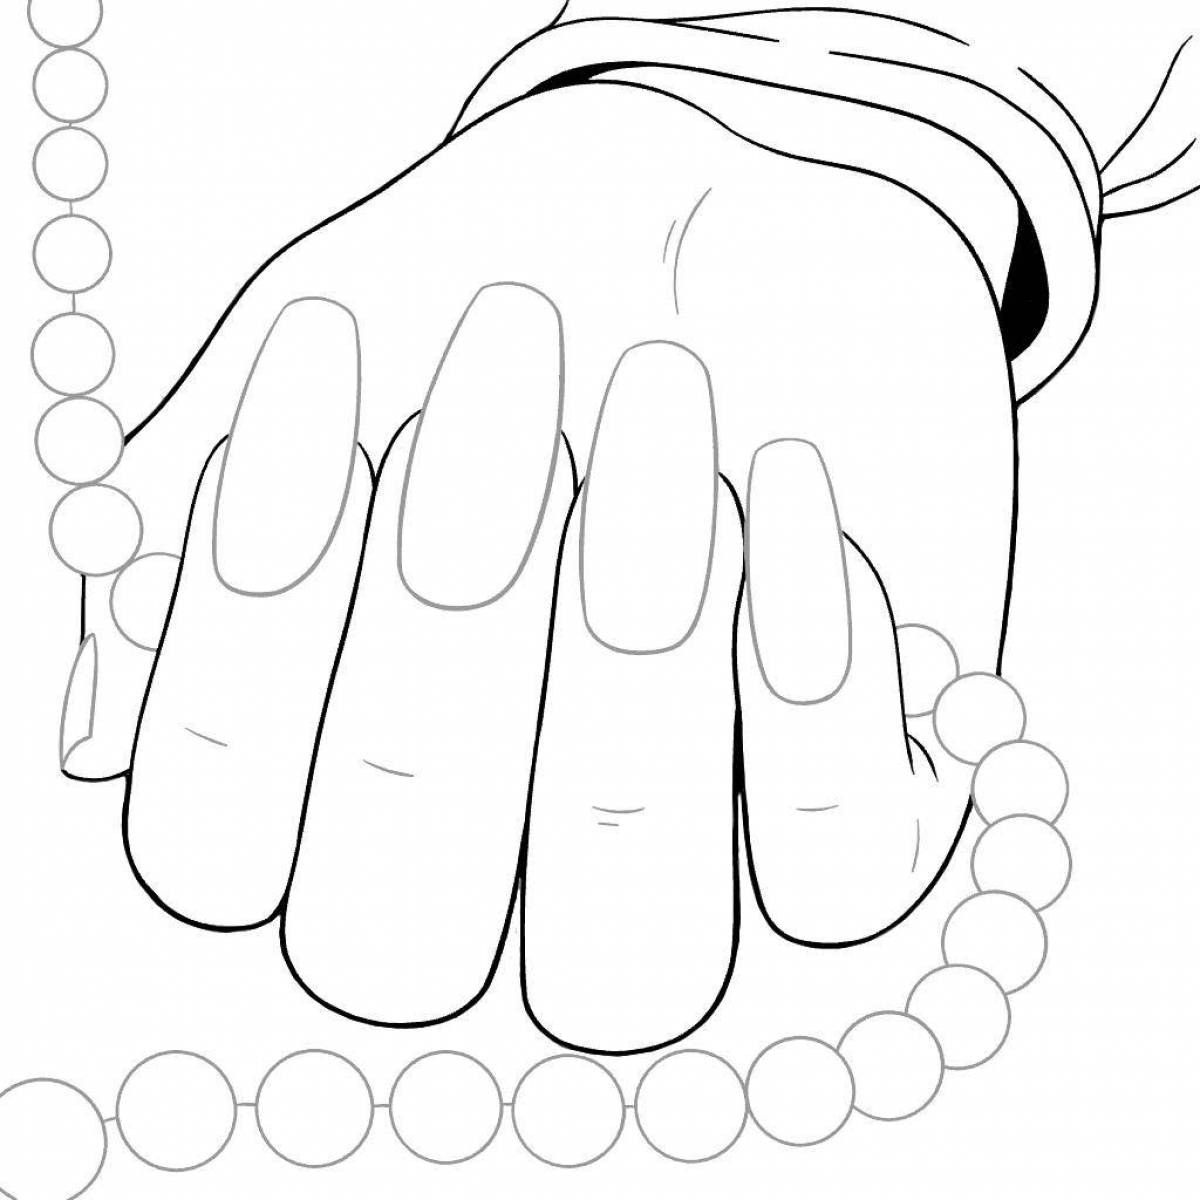 Coloring page gentle hand with long nails